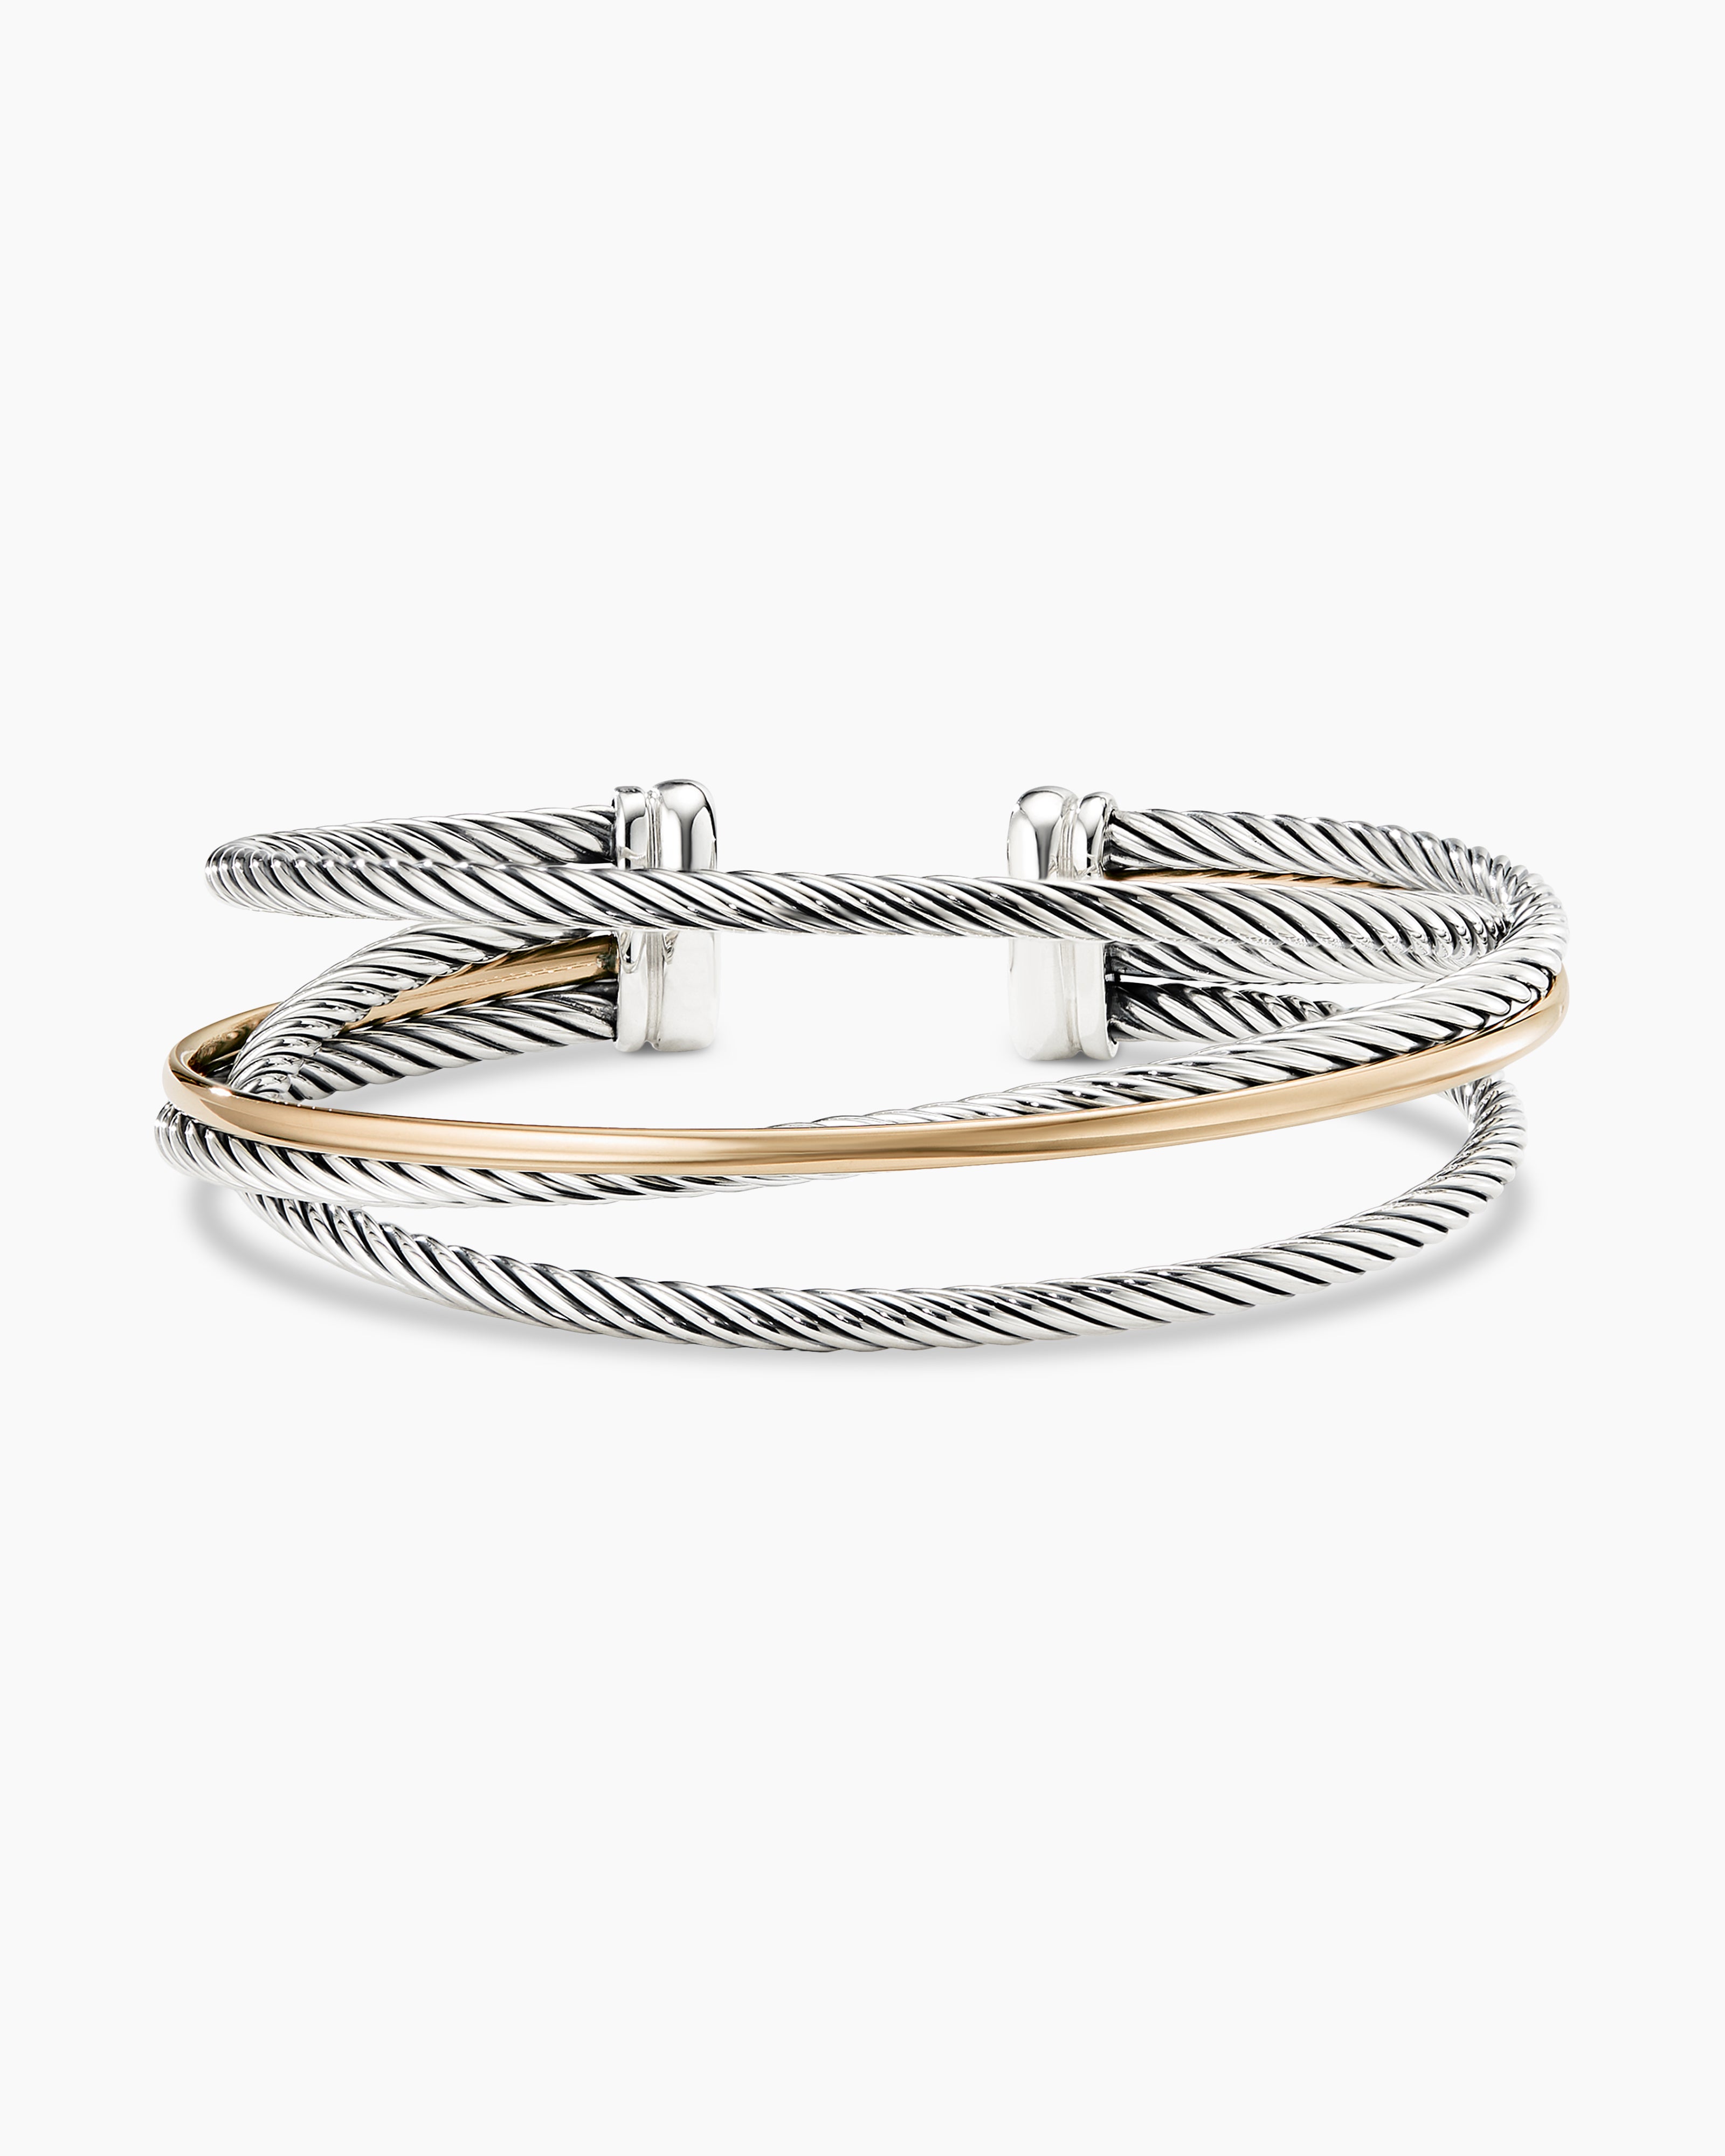 David Yurman Cable Crossover Cuff Bracelet at Jill's Consignment